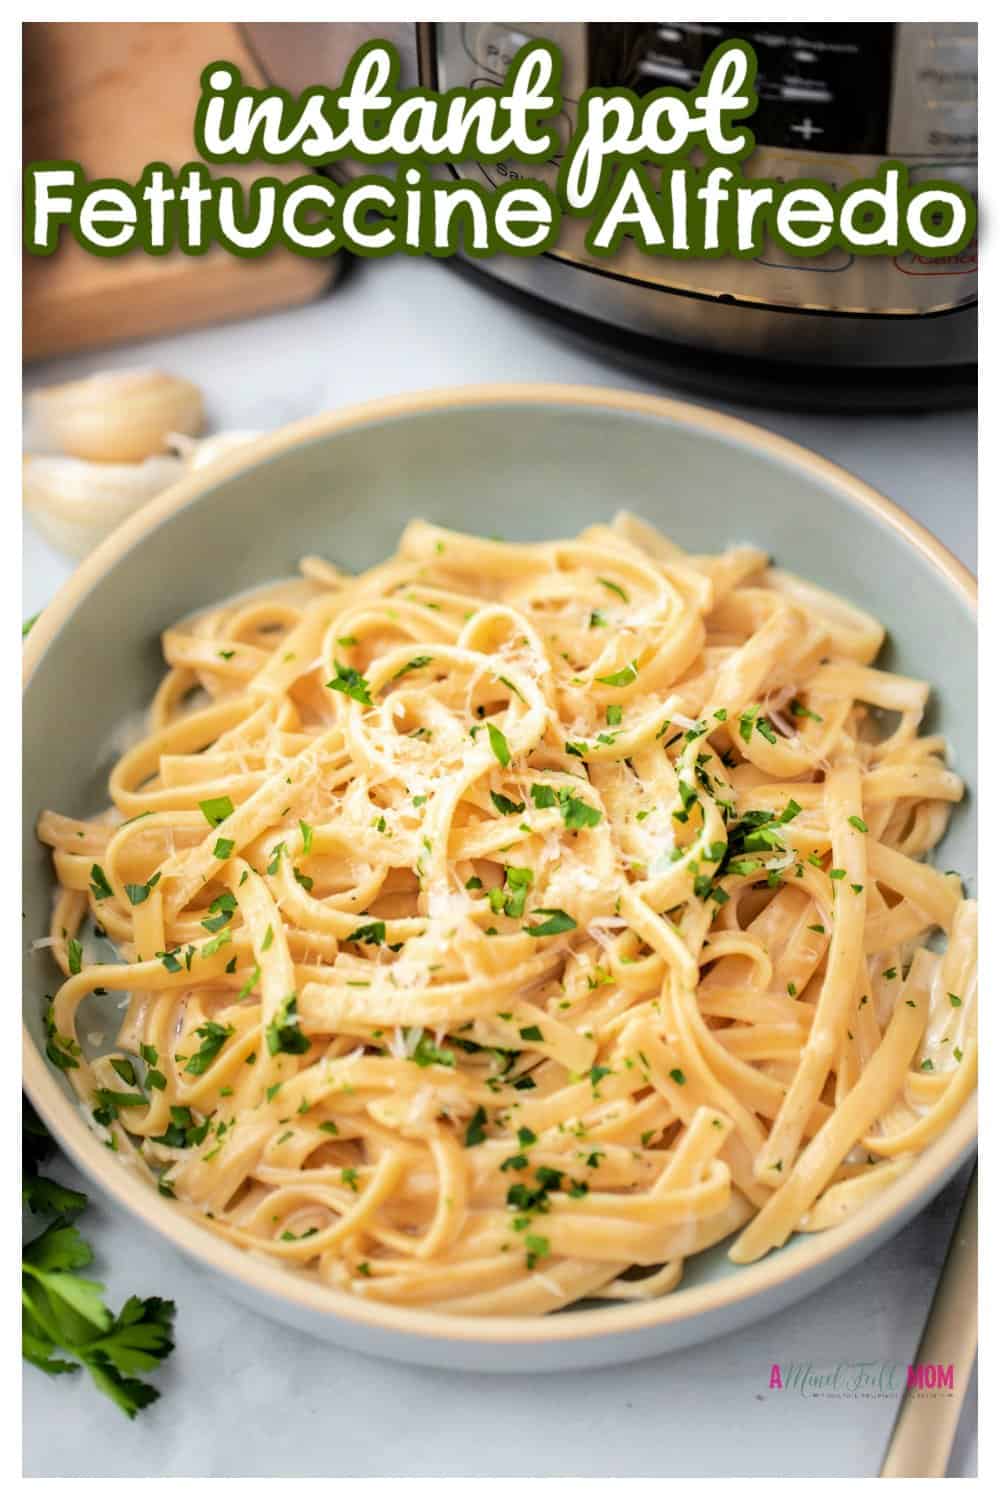 Fettuccine noodles cook to perfection in a rich, luscious cream sauce in this simple recipe for Instant Pot Fettuccine Alfredo. This is a one-pot family dinner recipe that comes together in under 30 minutes for a decadent pasta dinner.